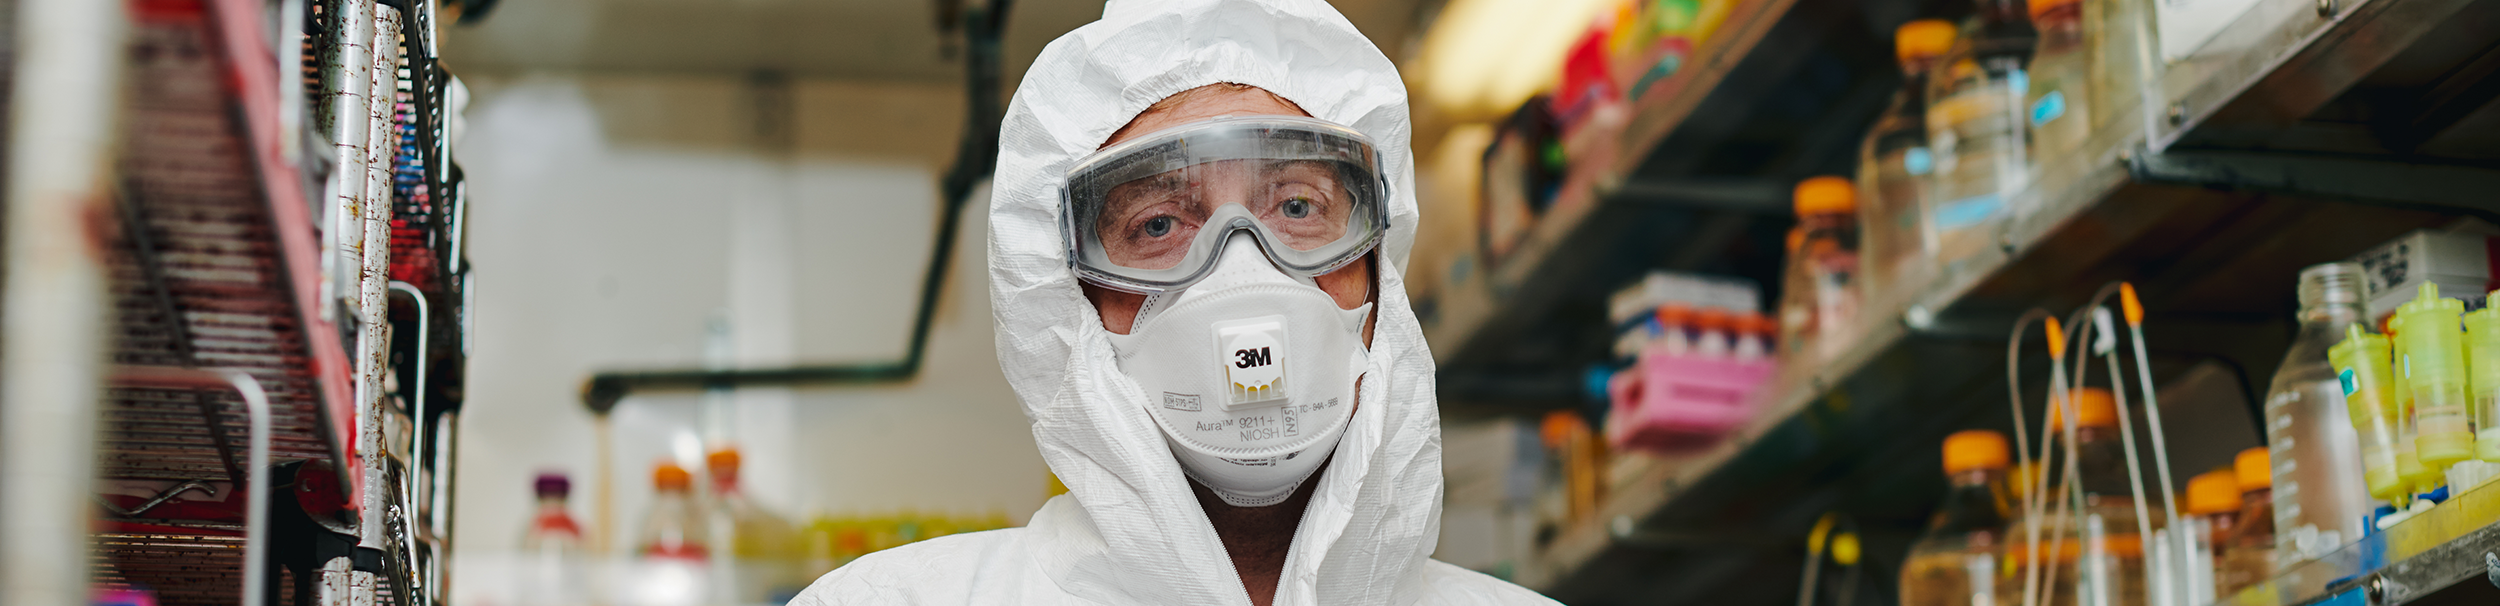 Researcher in a lab, in full safety gear